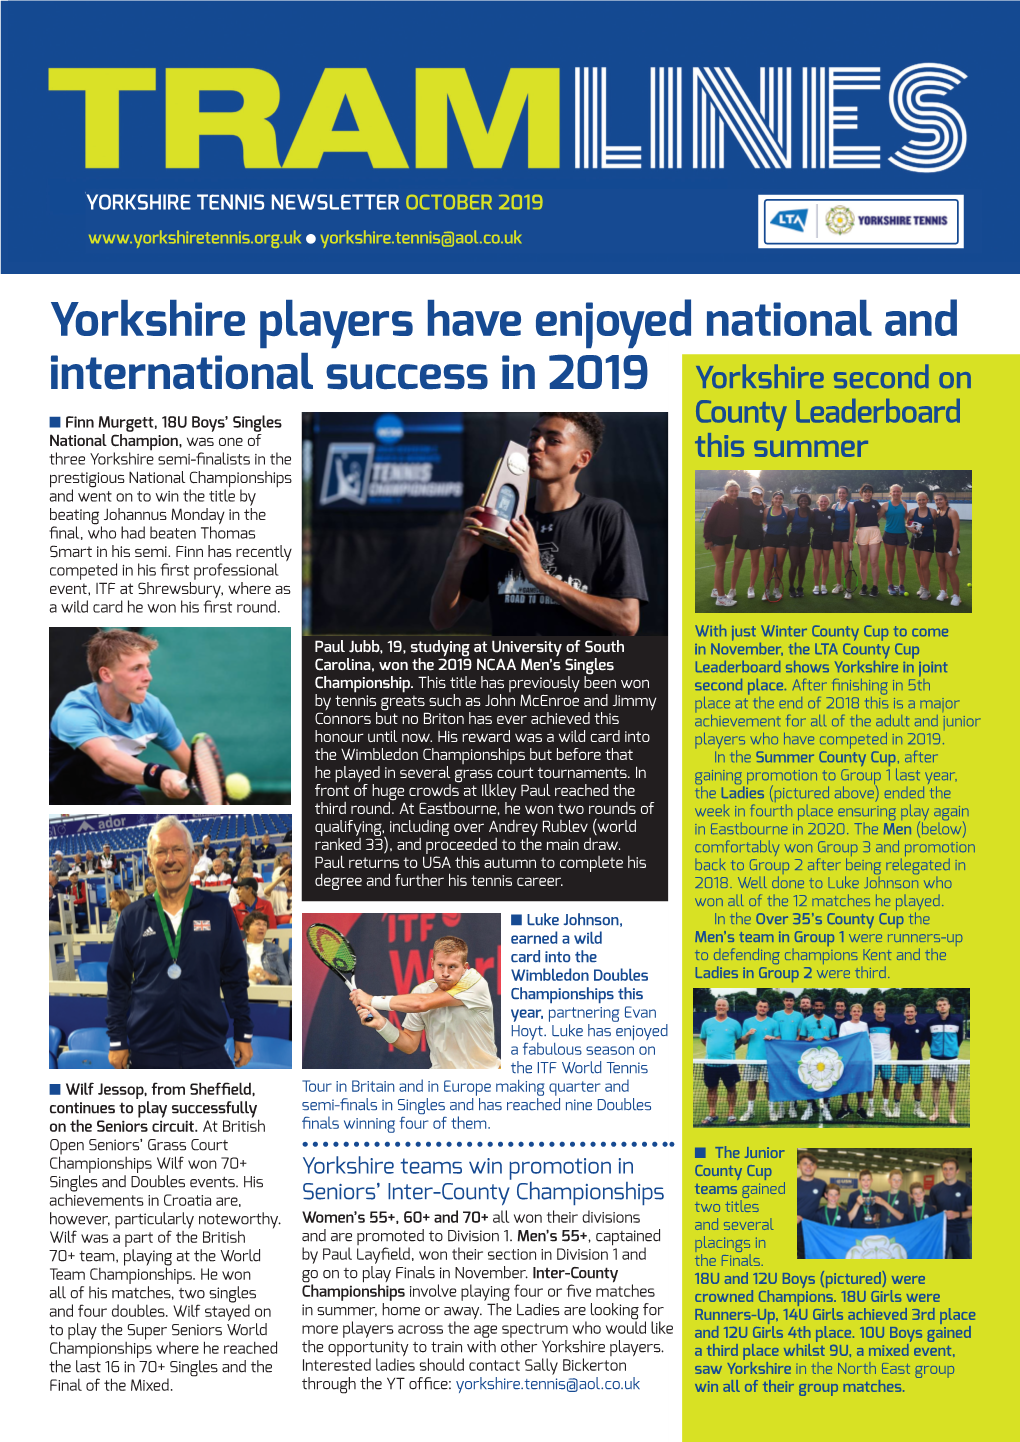 Yorkshire Players Have Enjoyed National and International Success